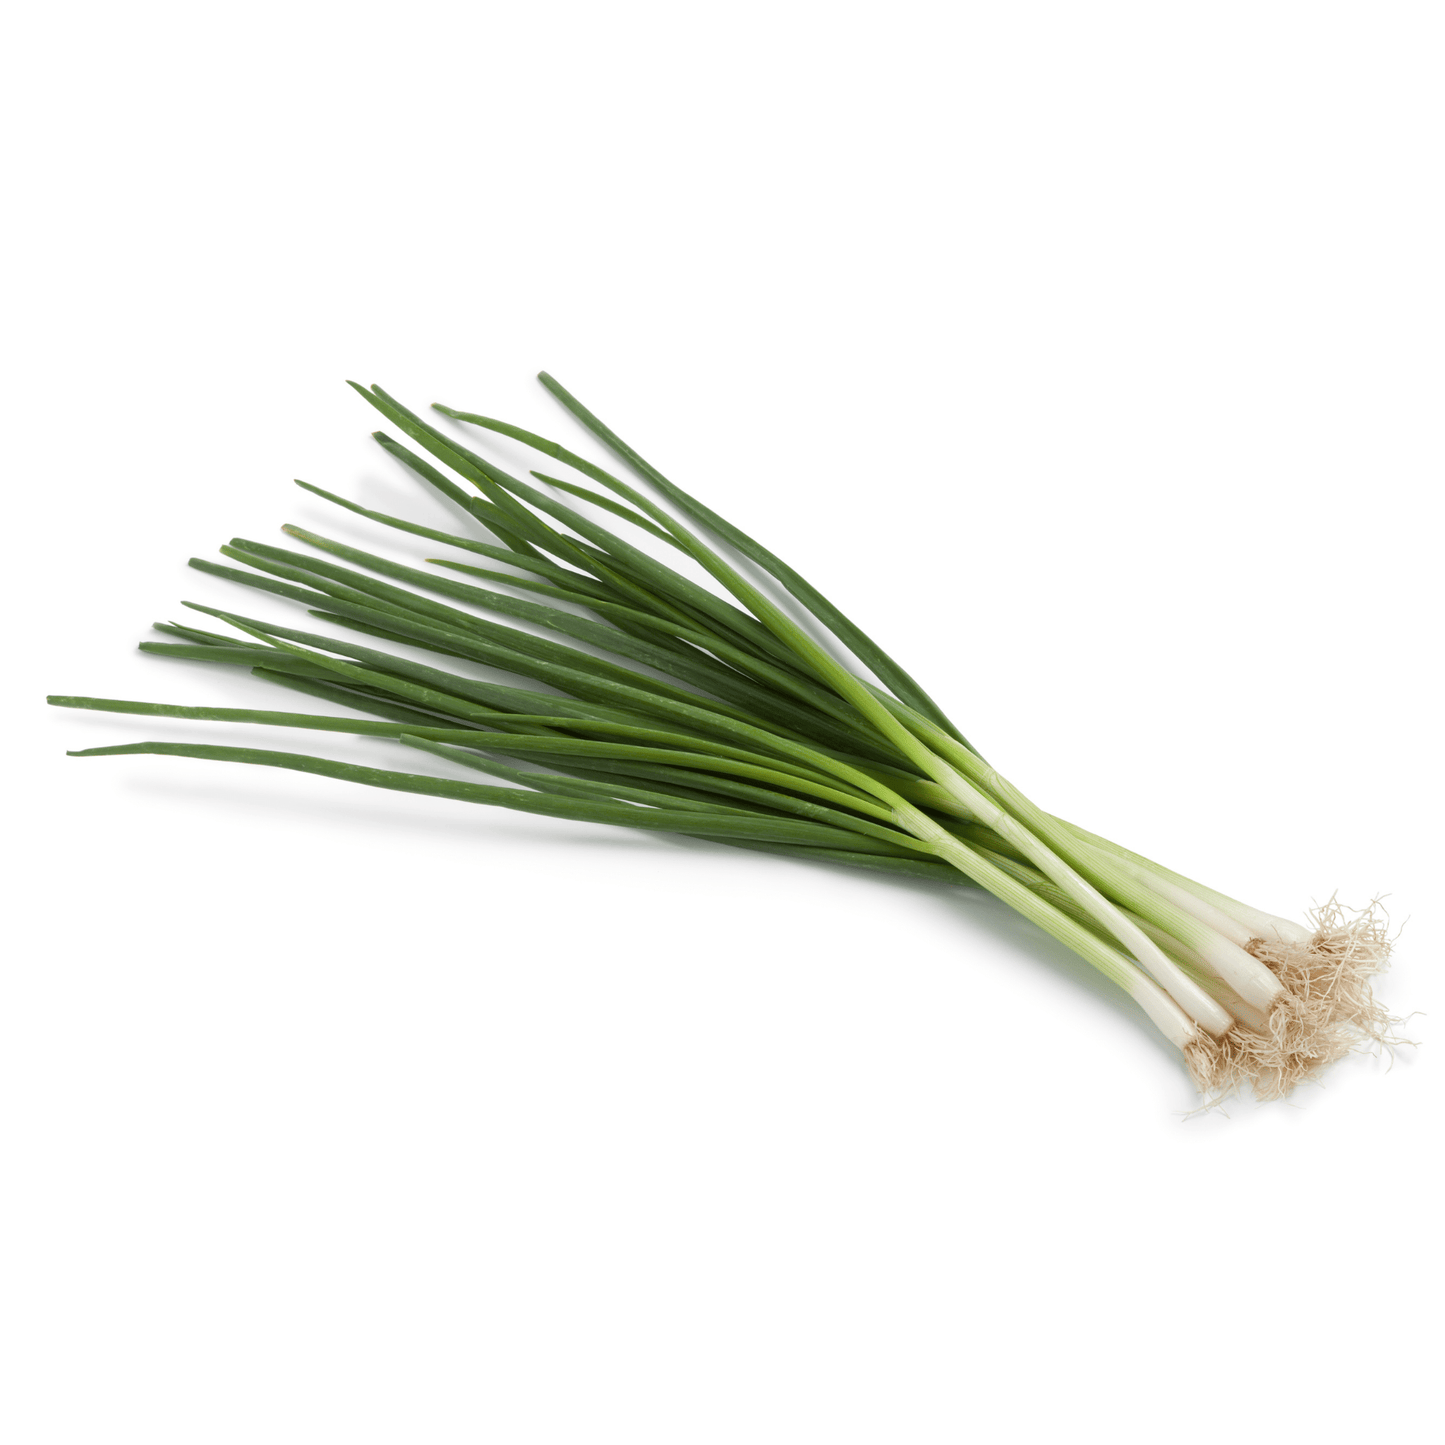 Tokyo Long White Bunching Onions - Hasty Roots